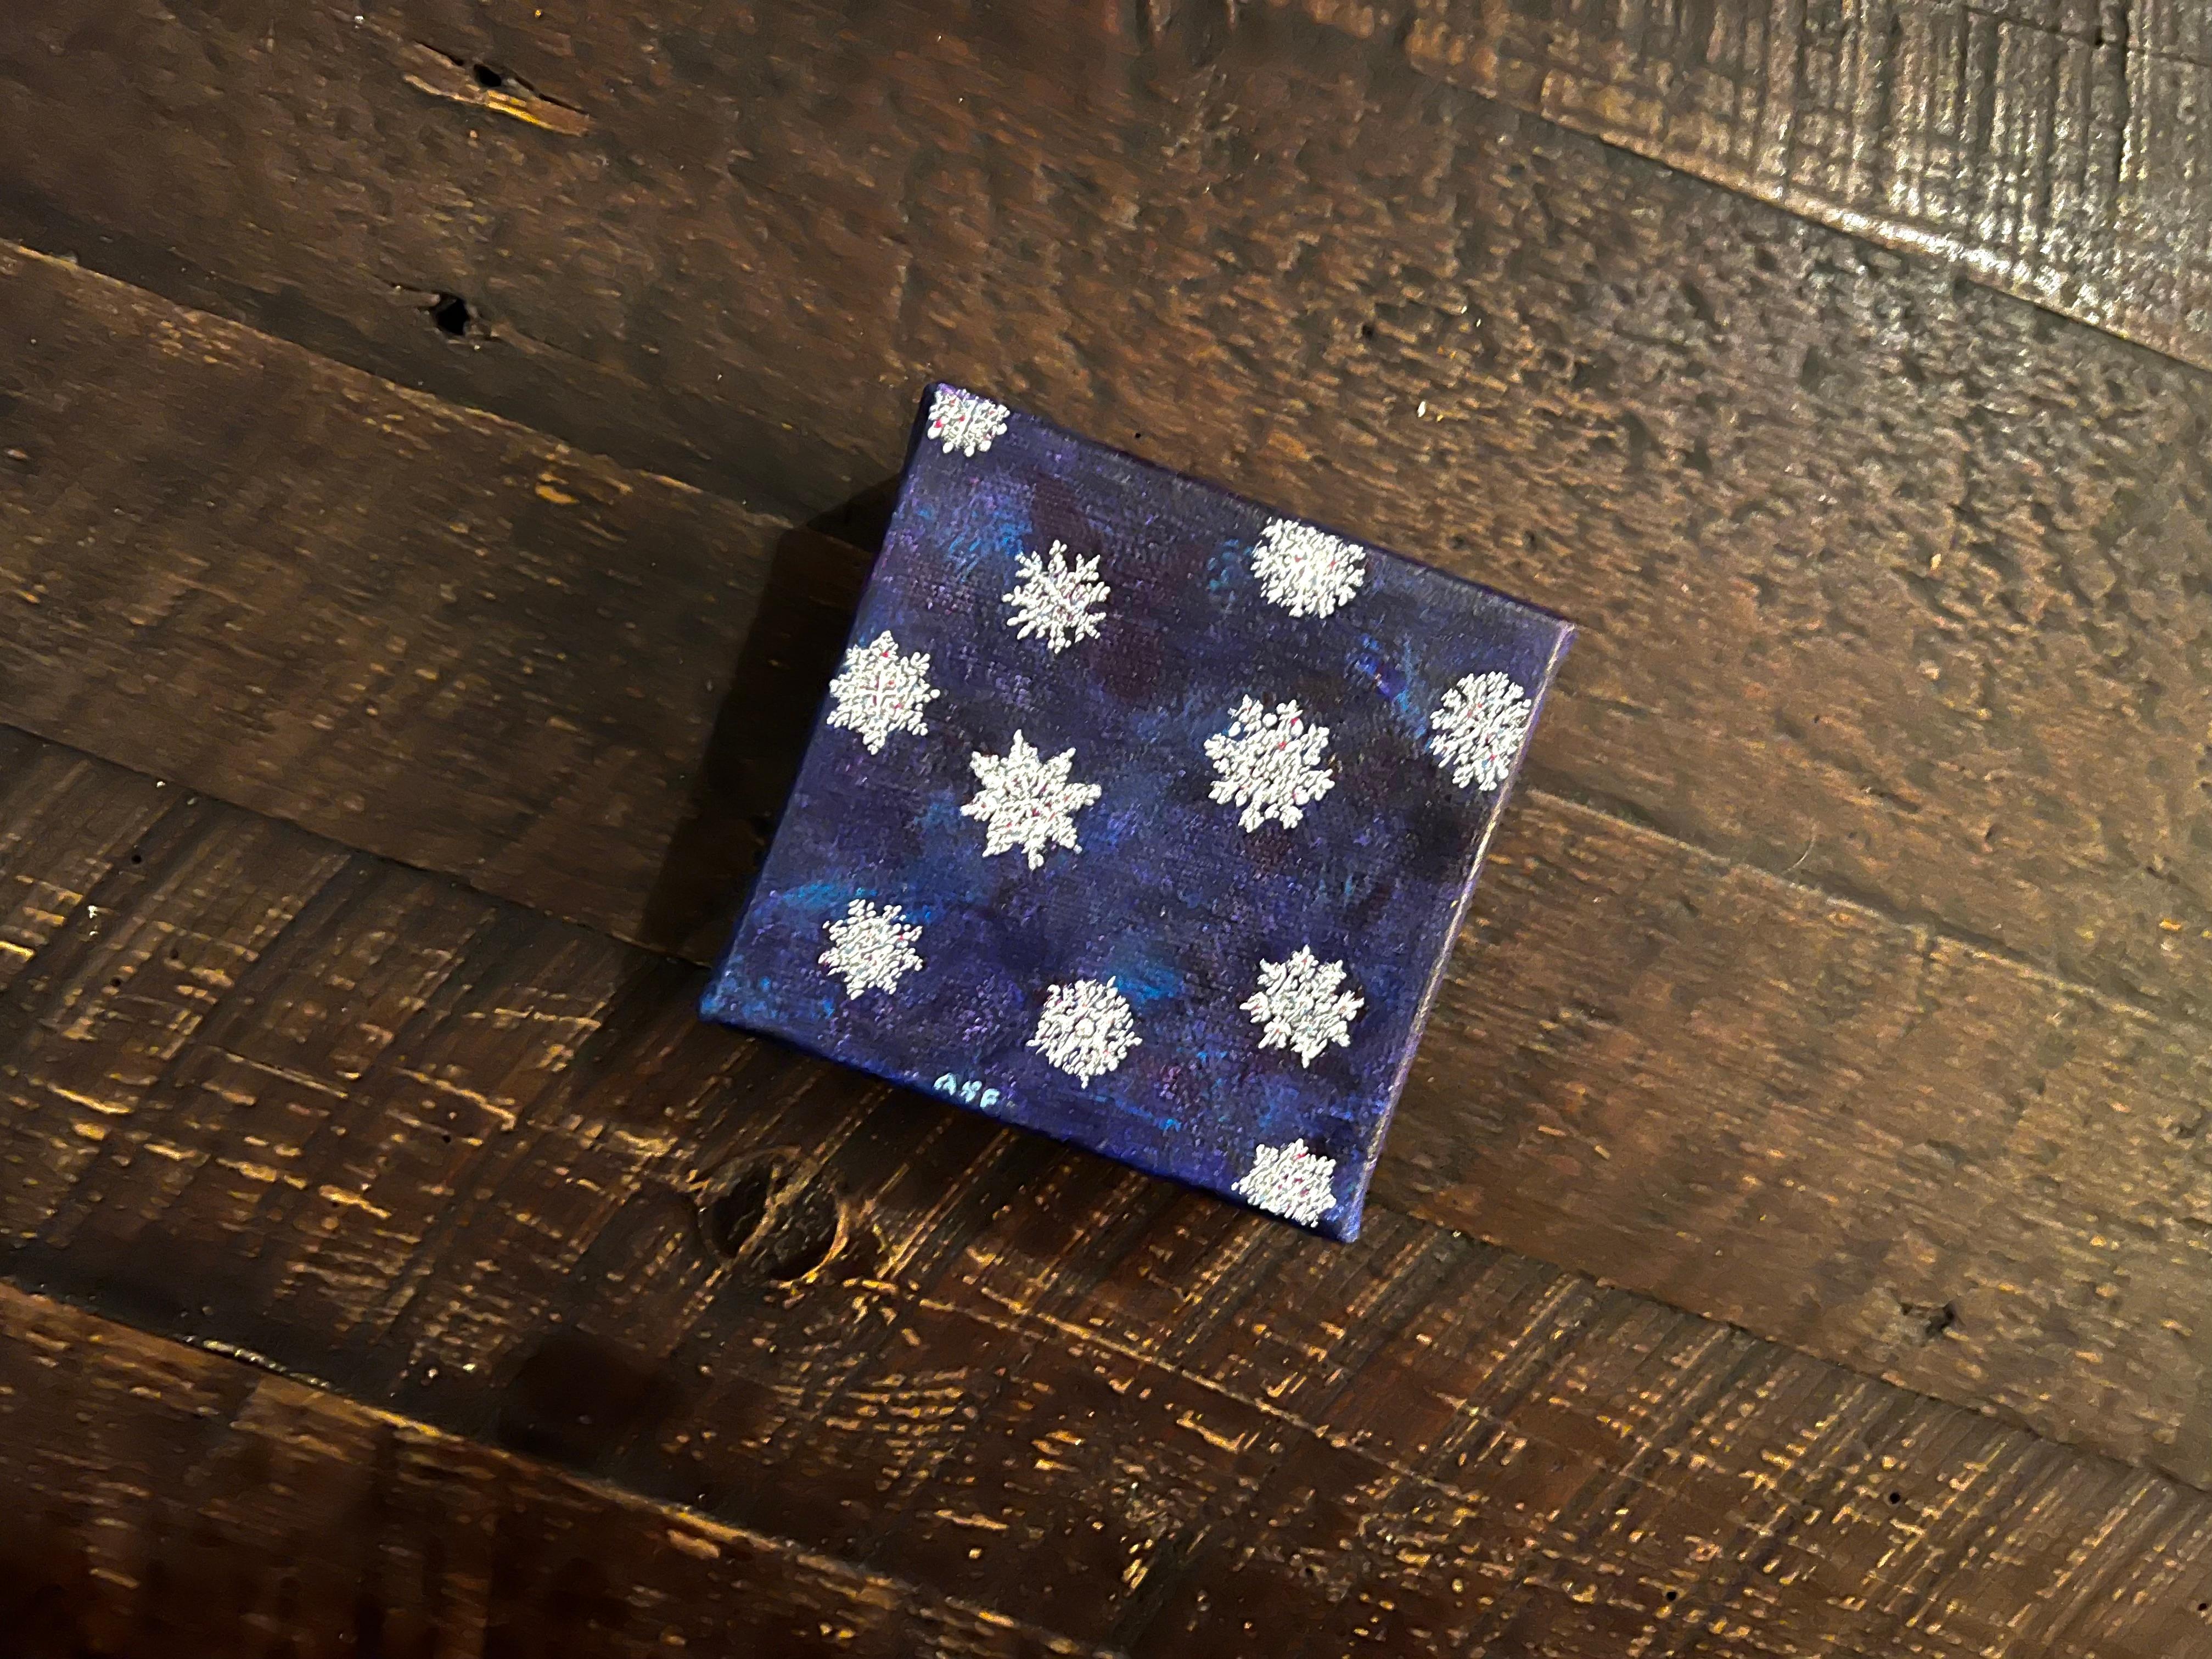 Andrea Stajan-Ferkul Landscape Painting - Snowflakes - 1  (4"x4", Blue And White, Winter, Snow, Christmas Small Painting)